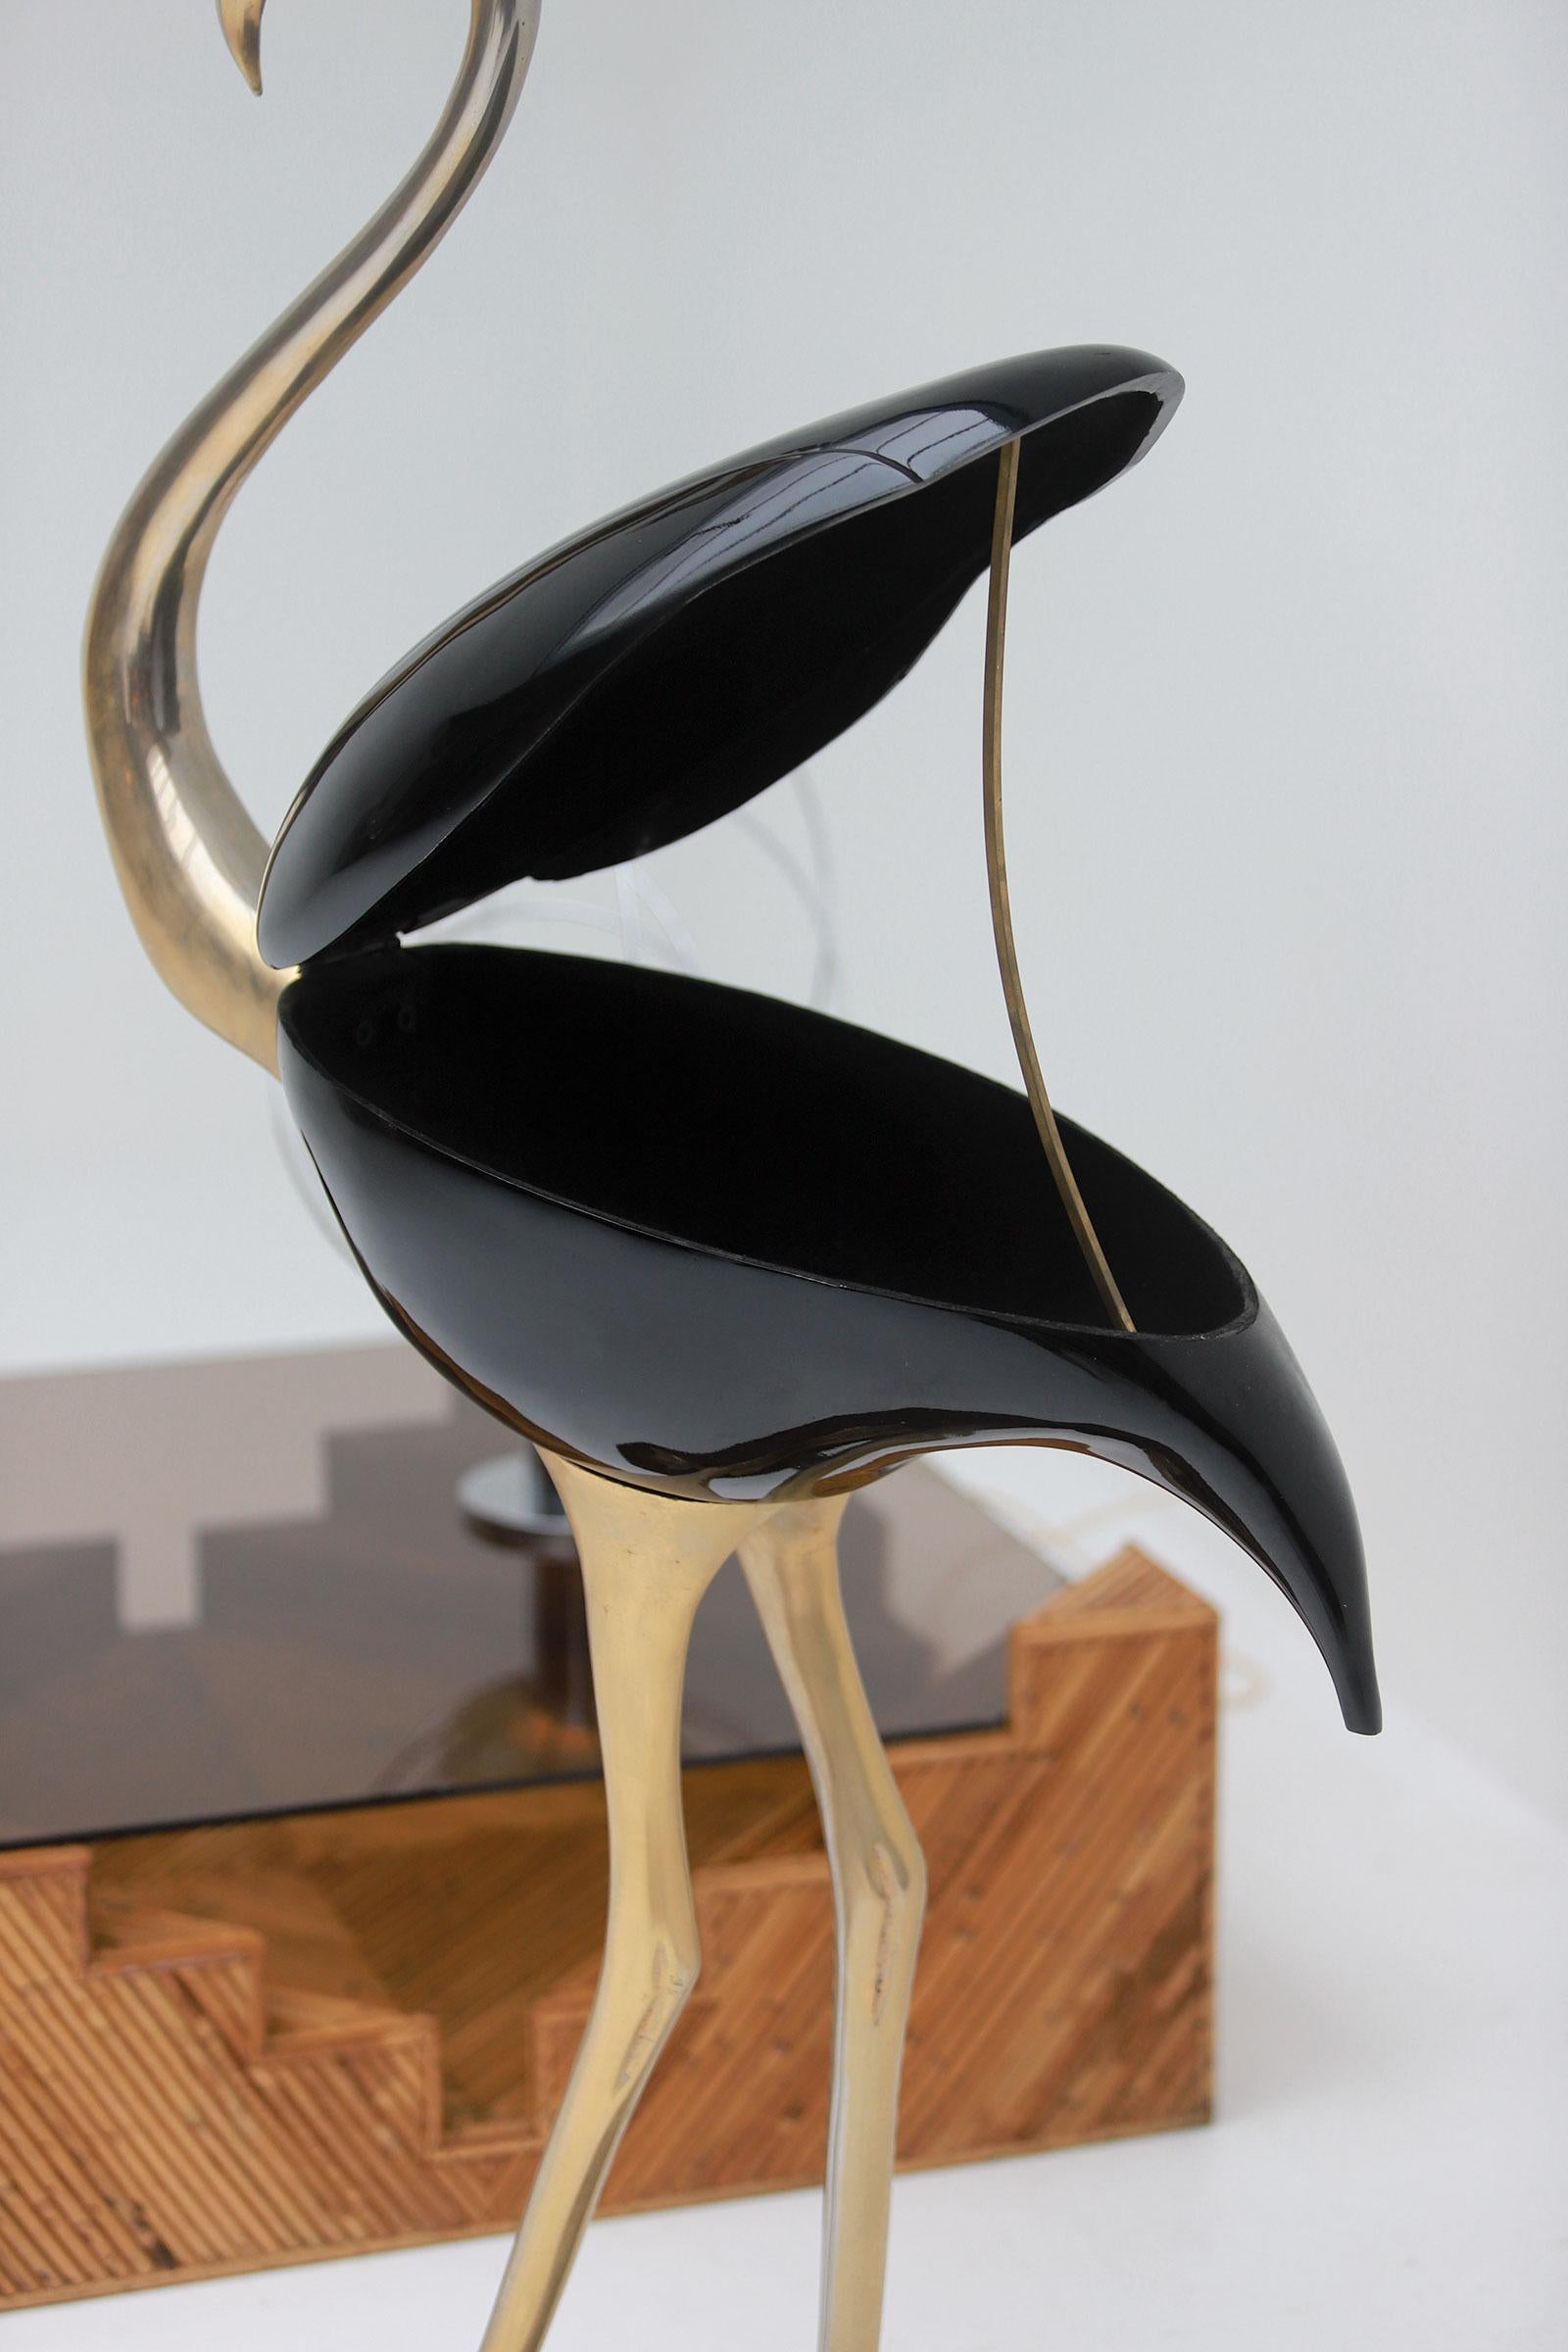 Lifesize Brass Flamingo with storage compartment by Fondica 1970s In Good Condition For Sale In Antwerpen, Antwerp